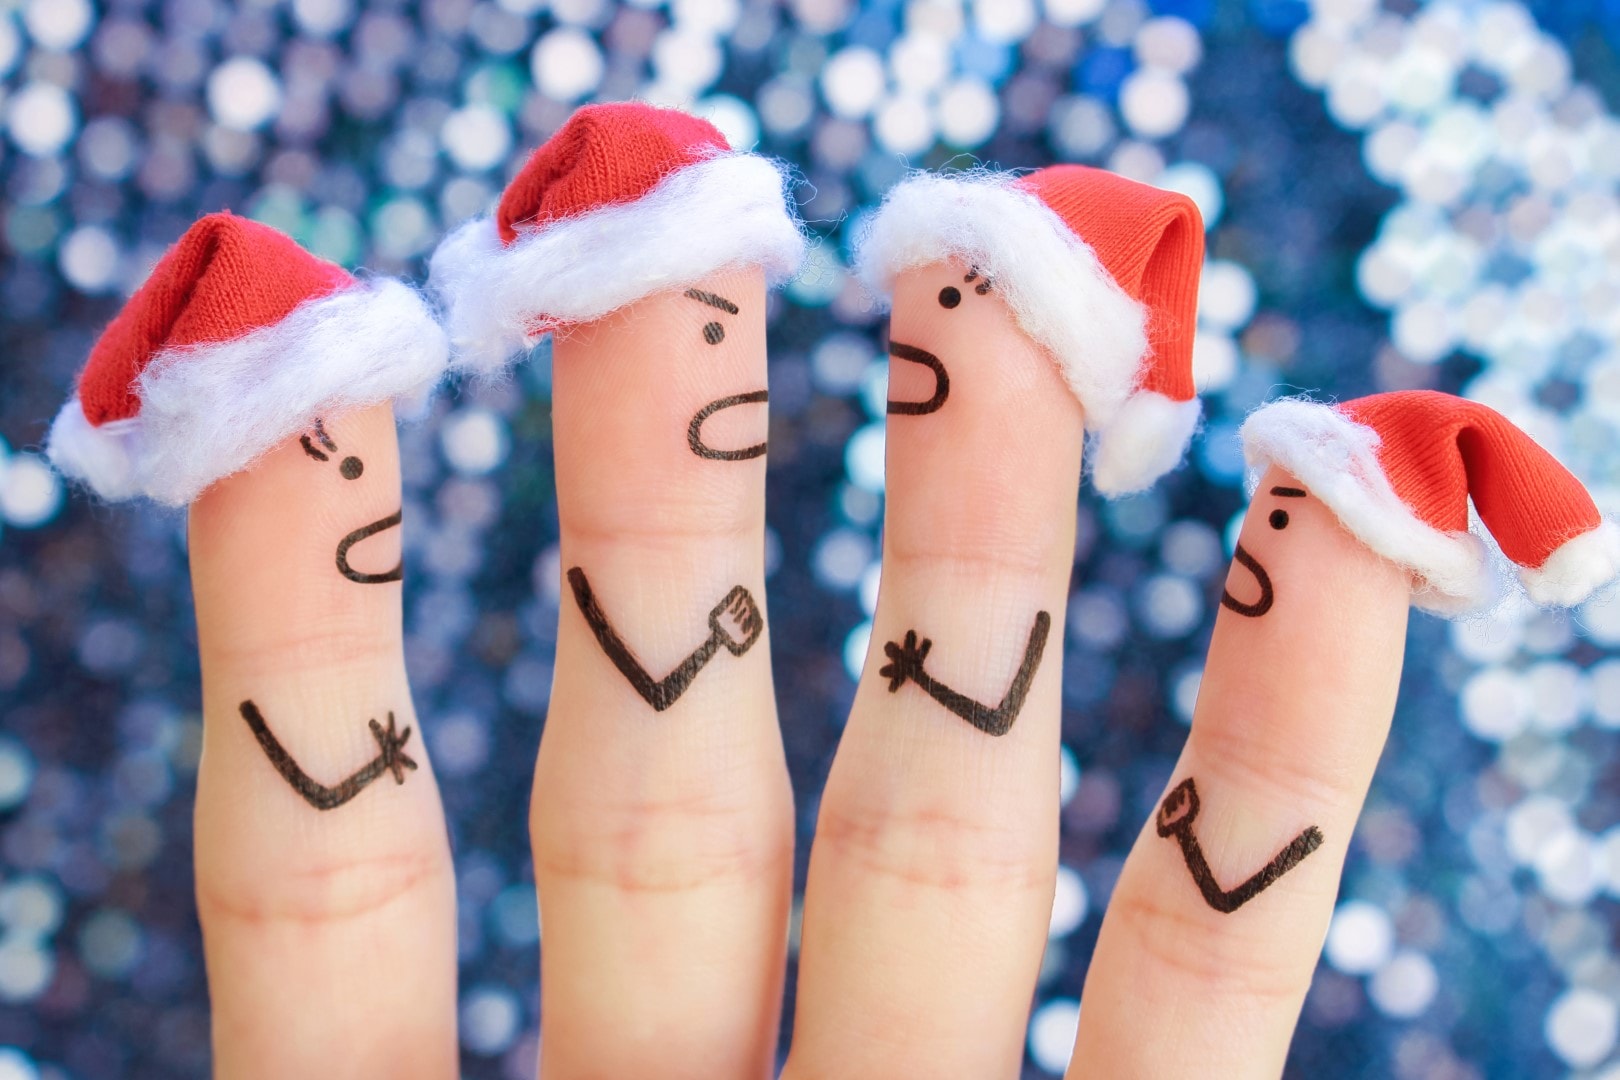 Fingers art of of people during quarrel in New Year.